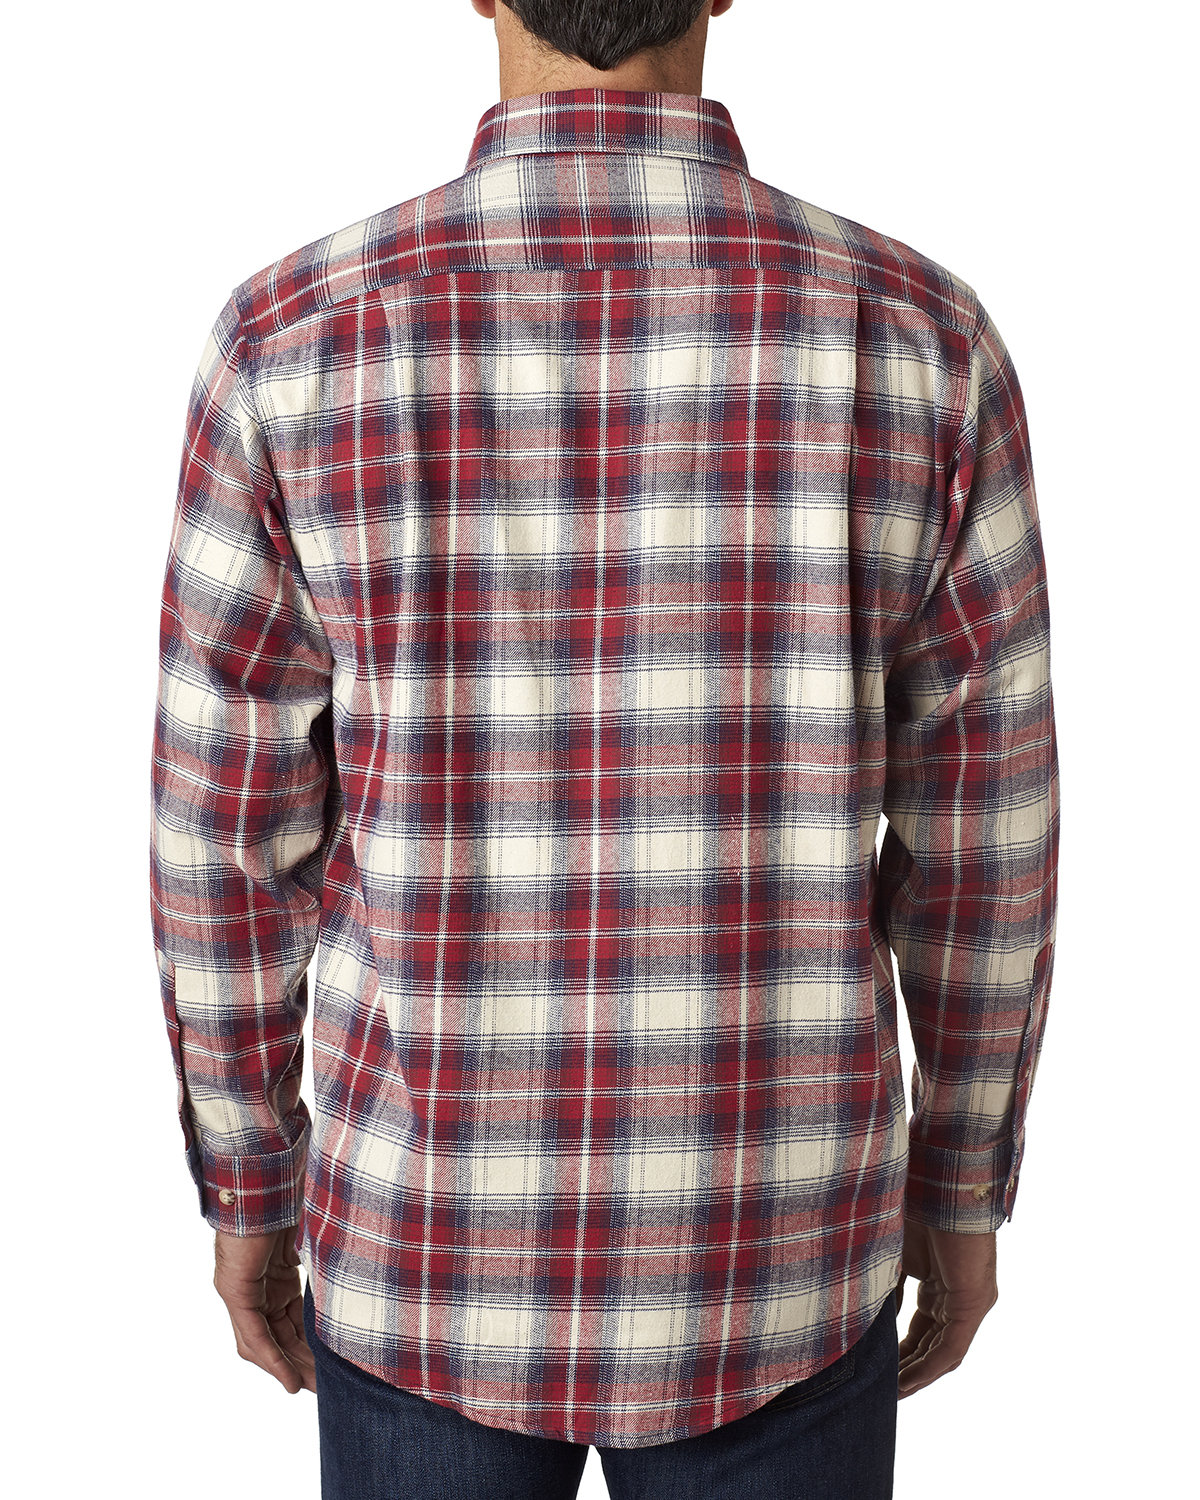 Backpacker Men's Tall Yarn-Dyed Flannel Shirt | alphabroder